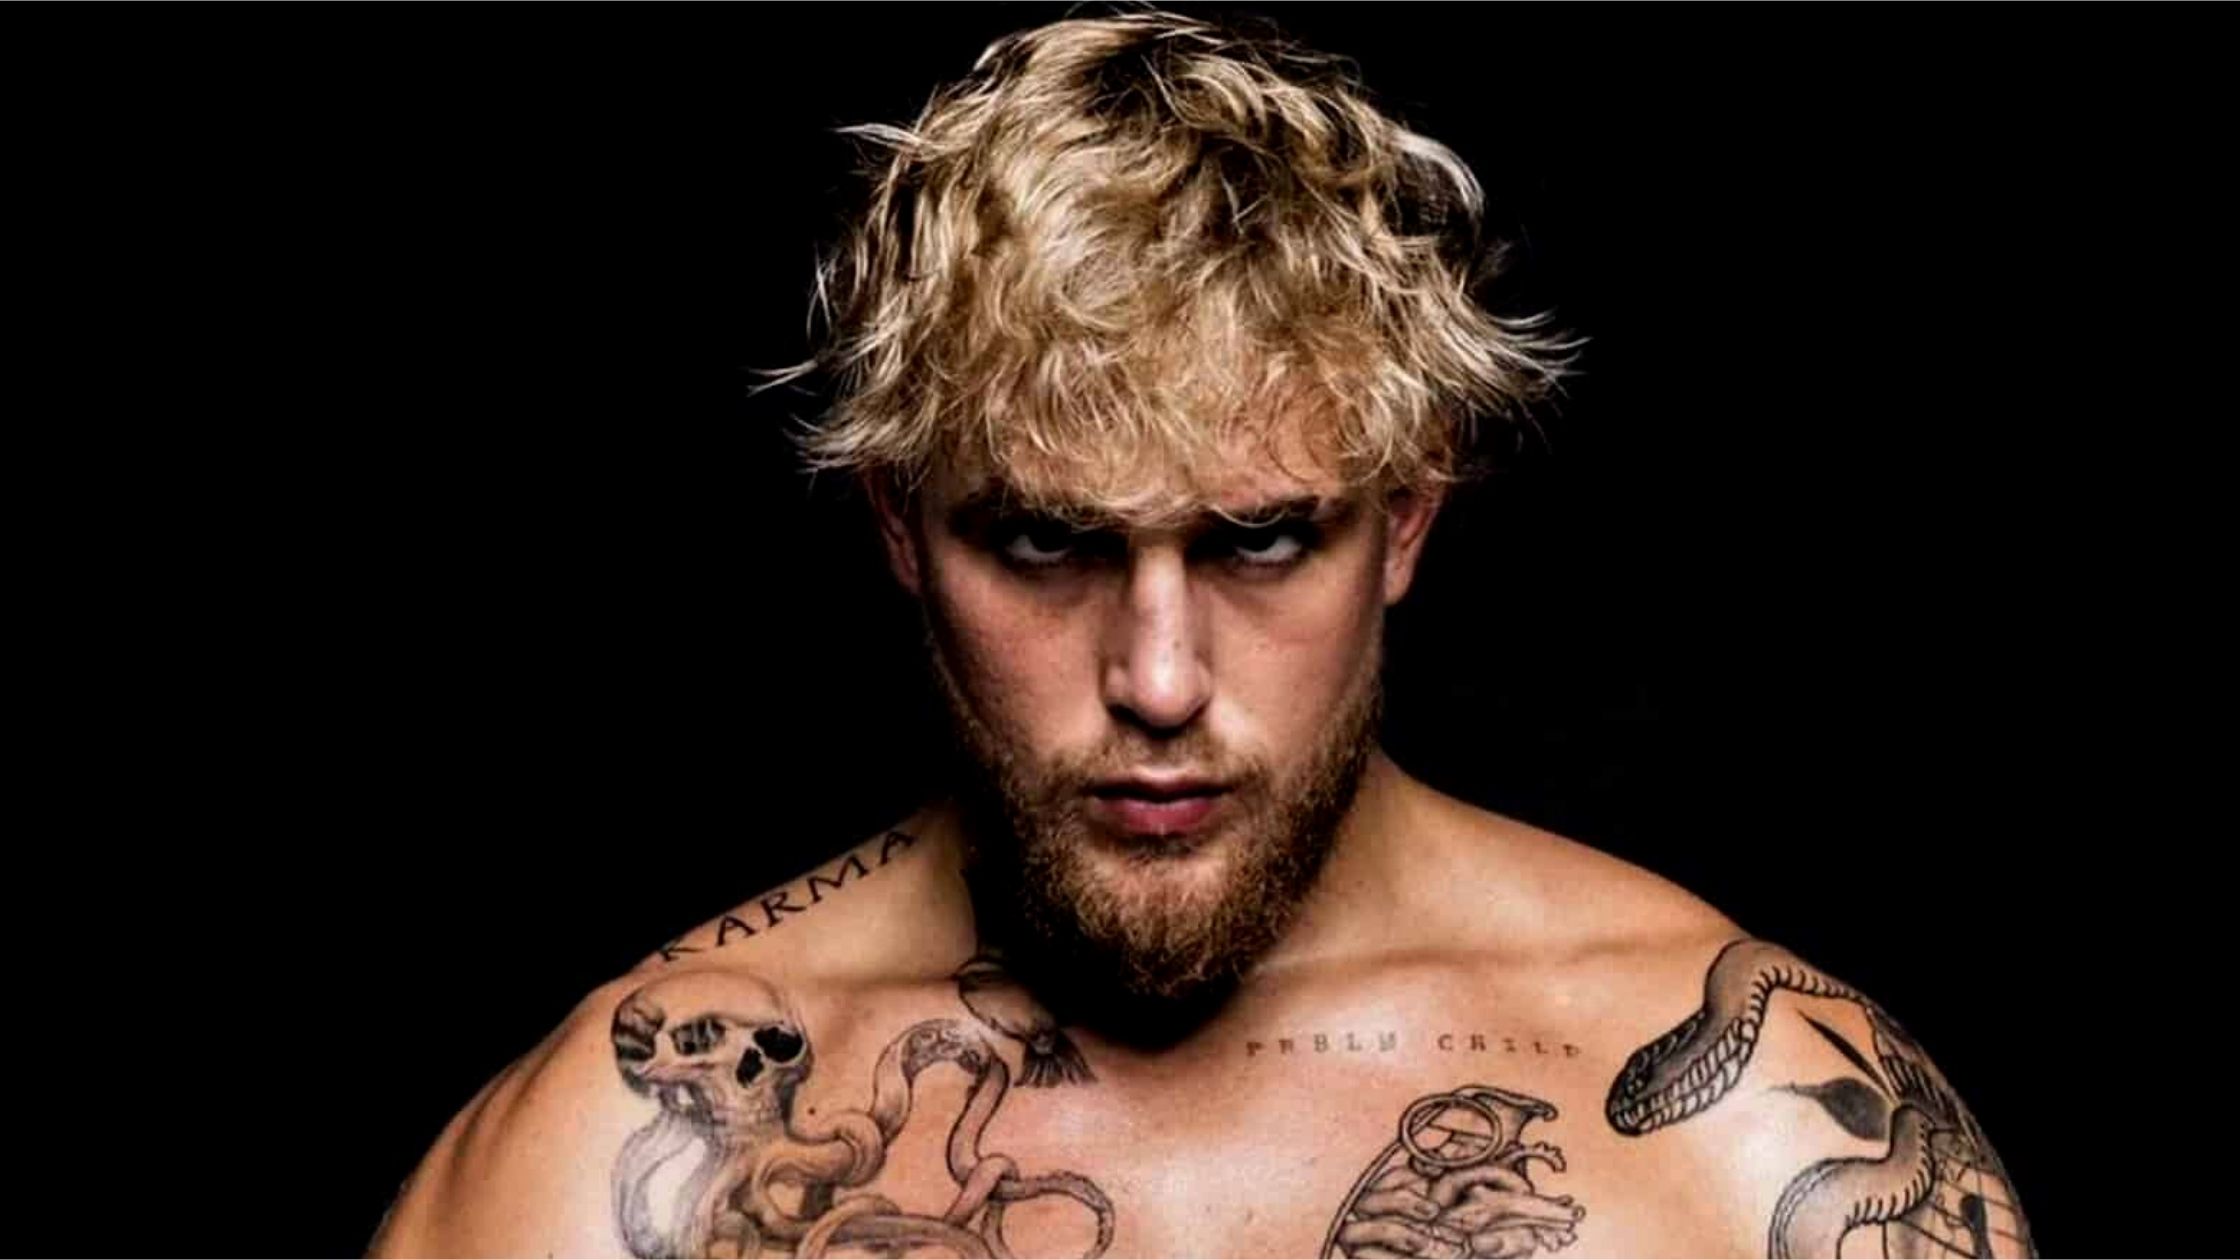 Jake Paul’s Net Worth, Height, Age, Weight, Boxing Record!
